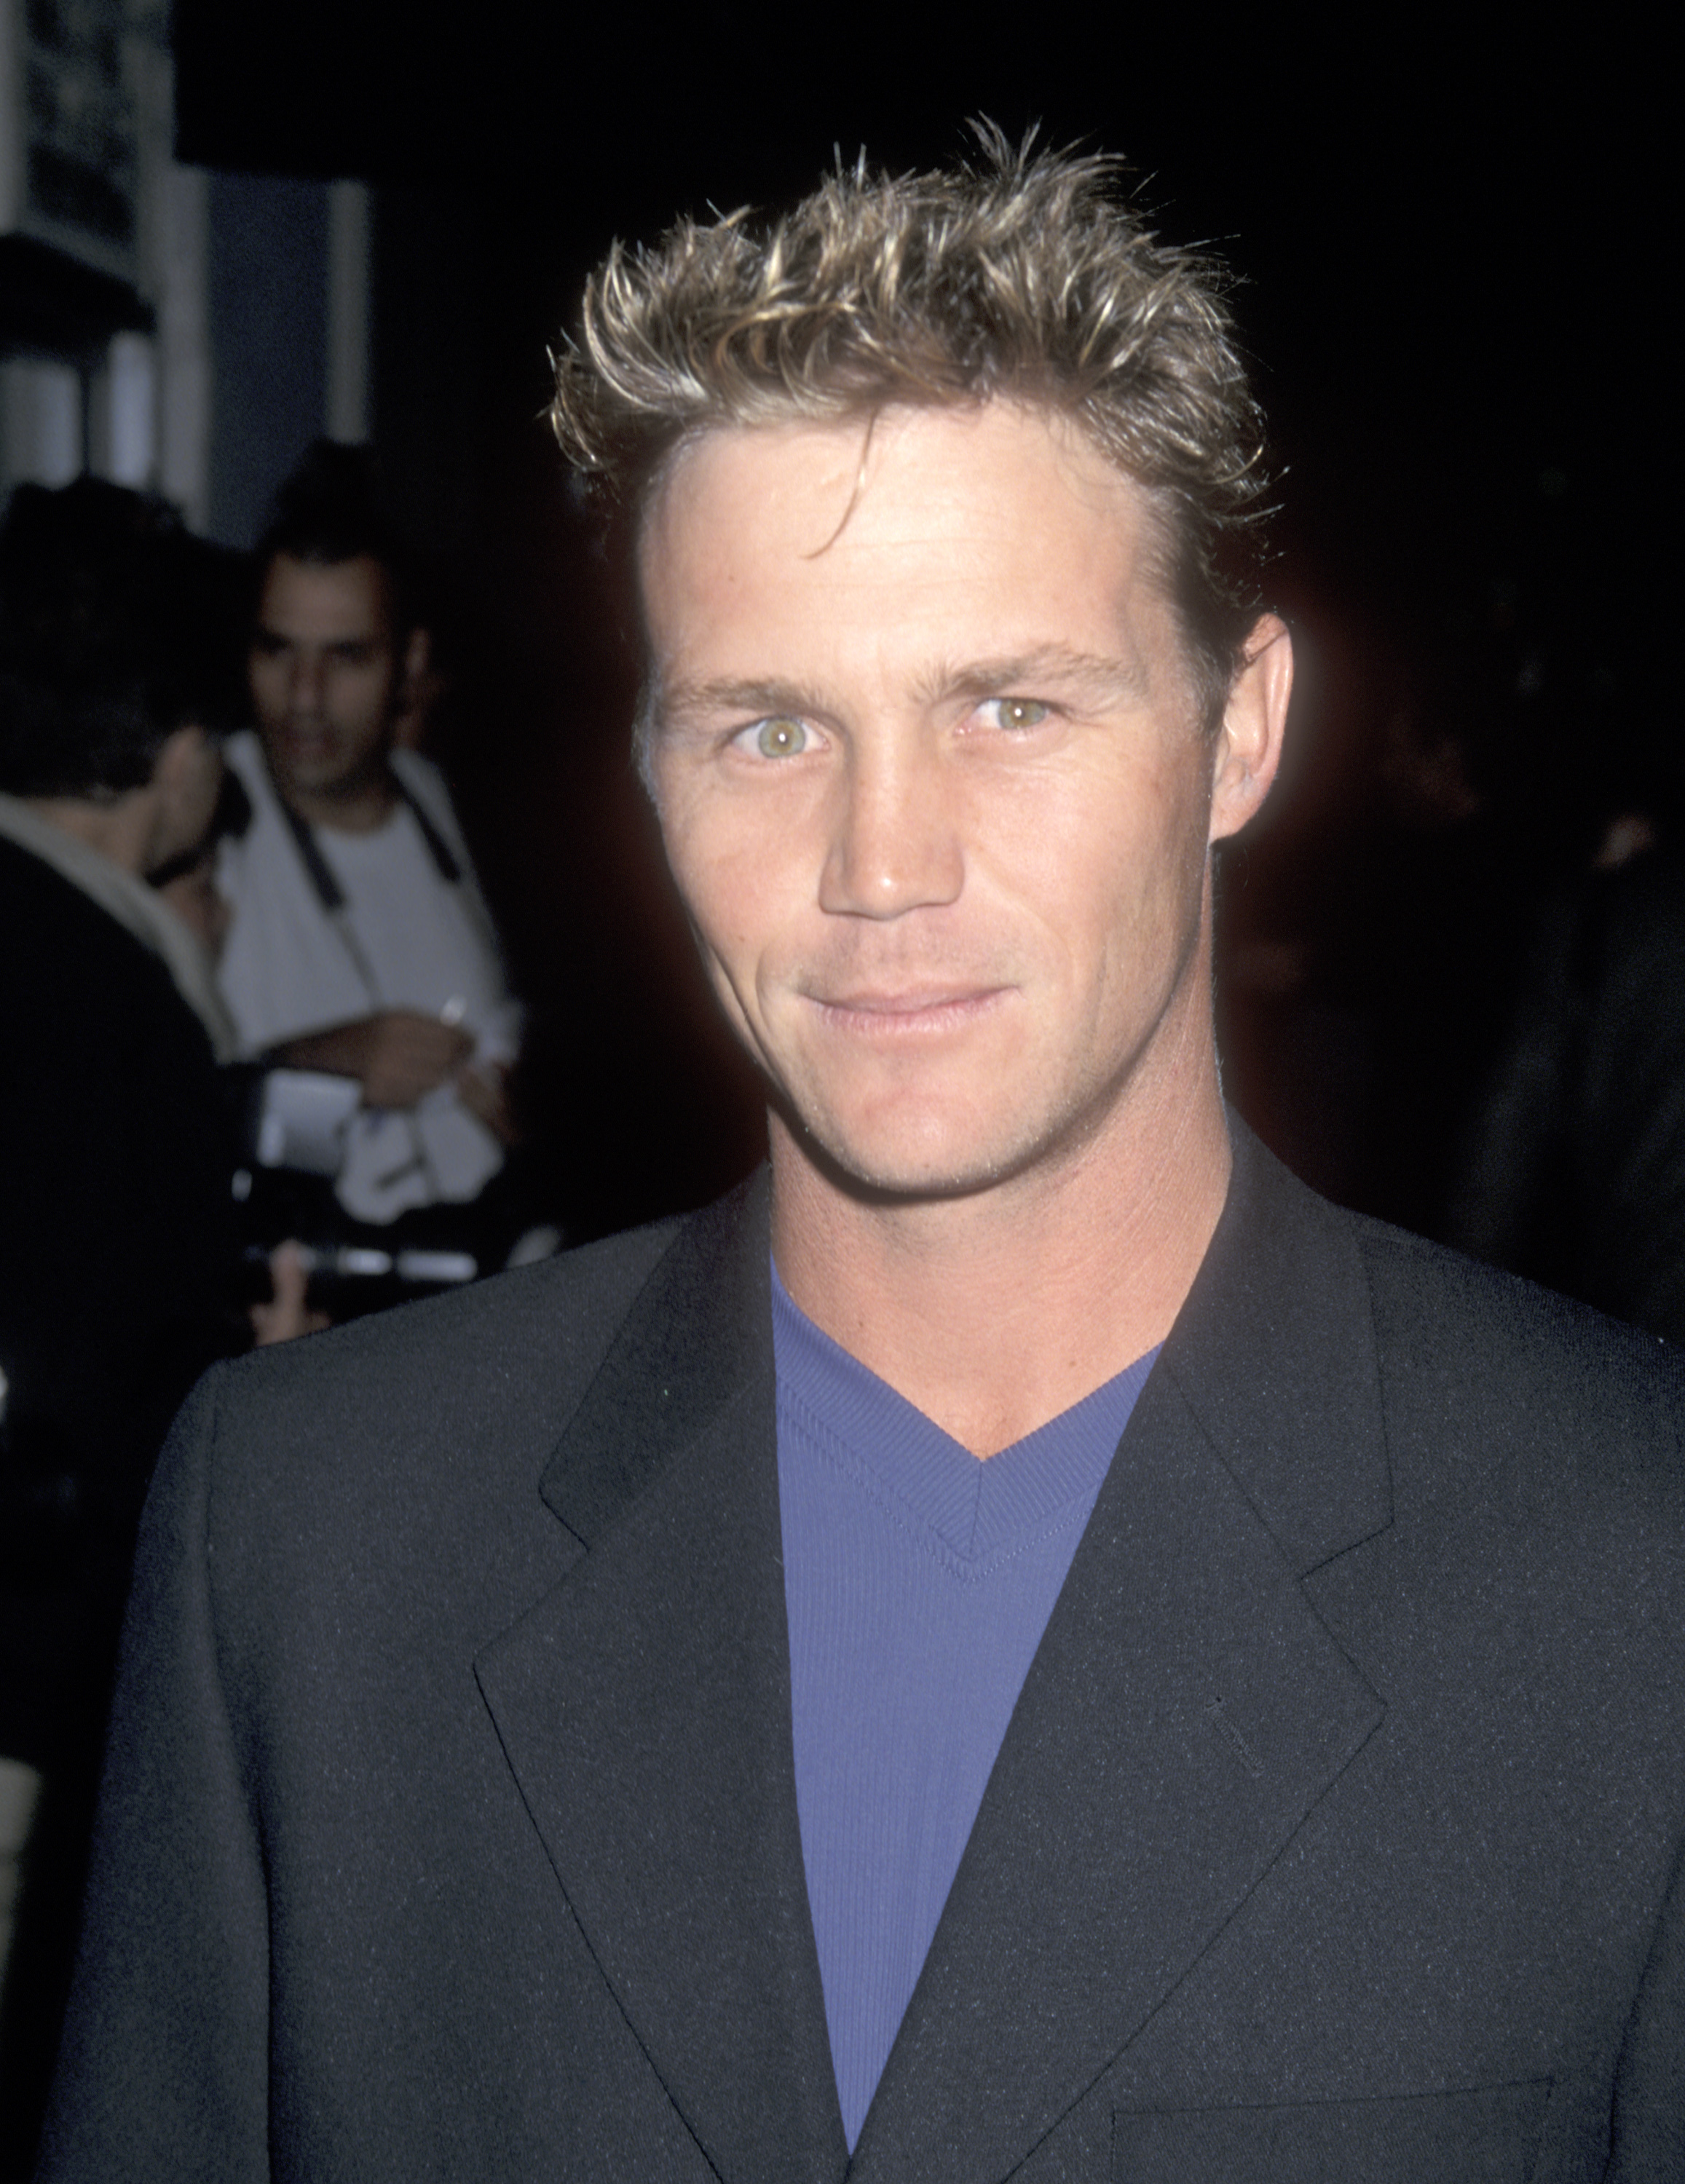 Brian Krause at the "Sugar Town" premiere in Beverly Hills, 1999 | Source: Getty Images